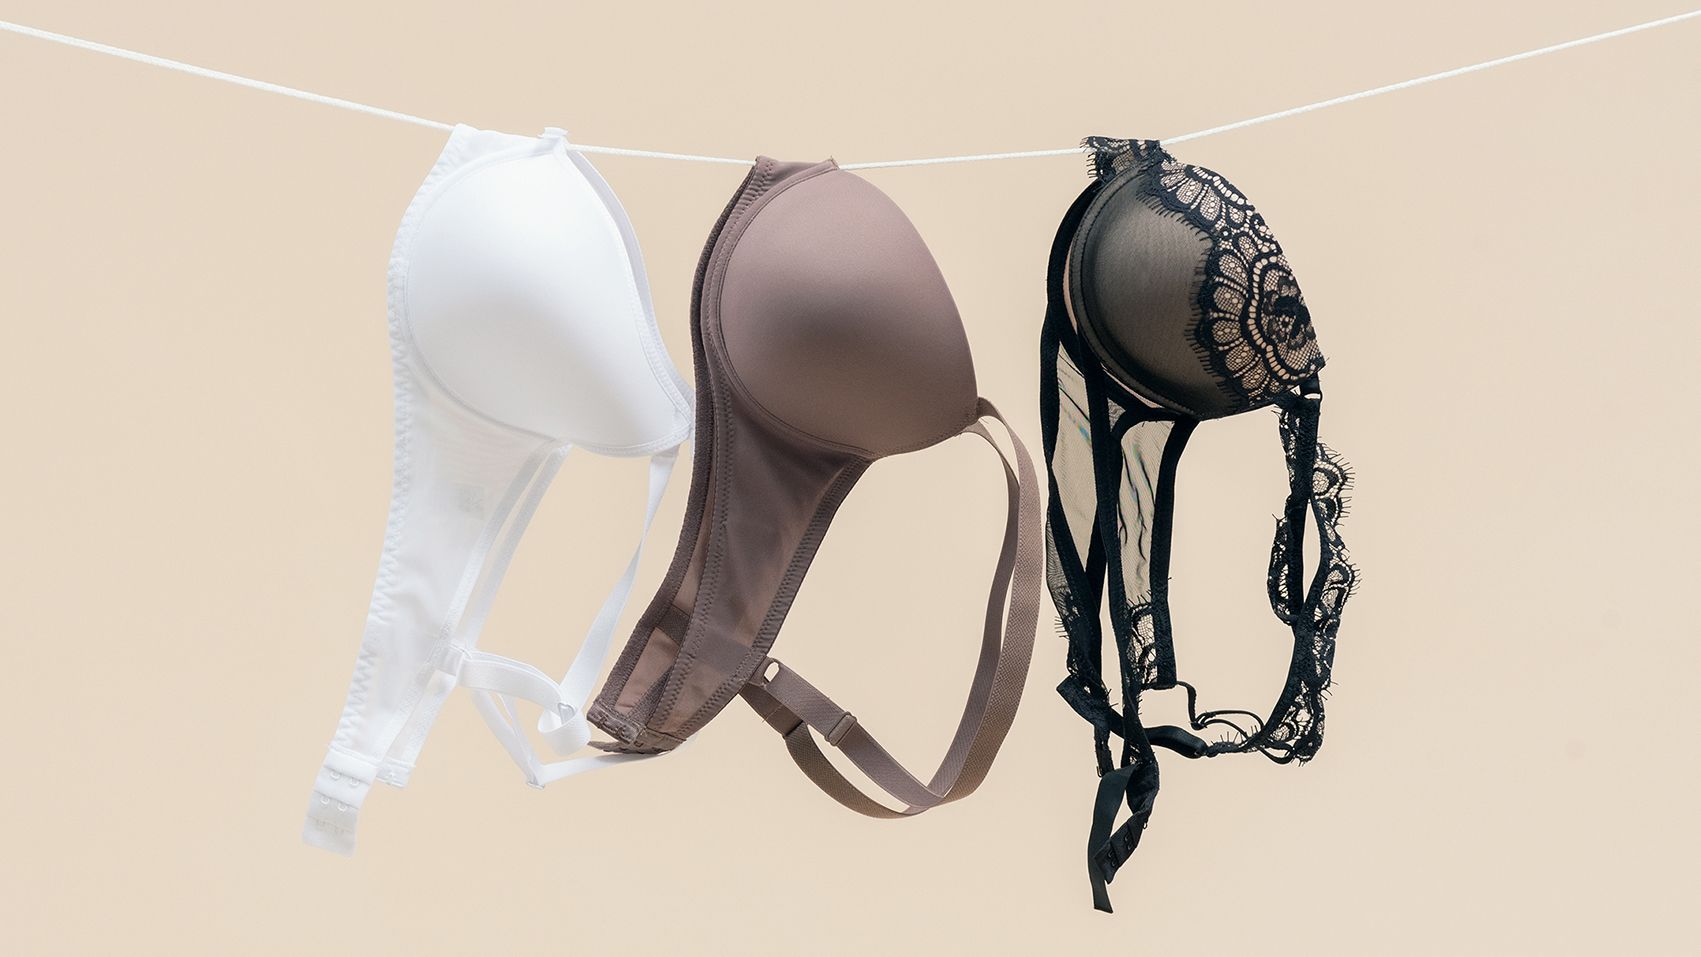 The Ultimate Guide To Buying, Wearing, And Caring For Bras